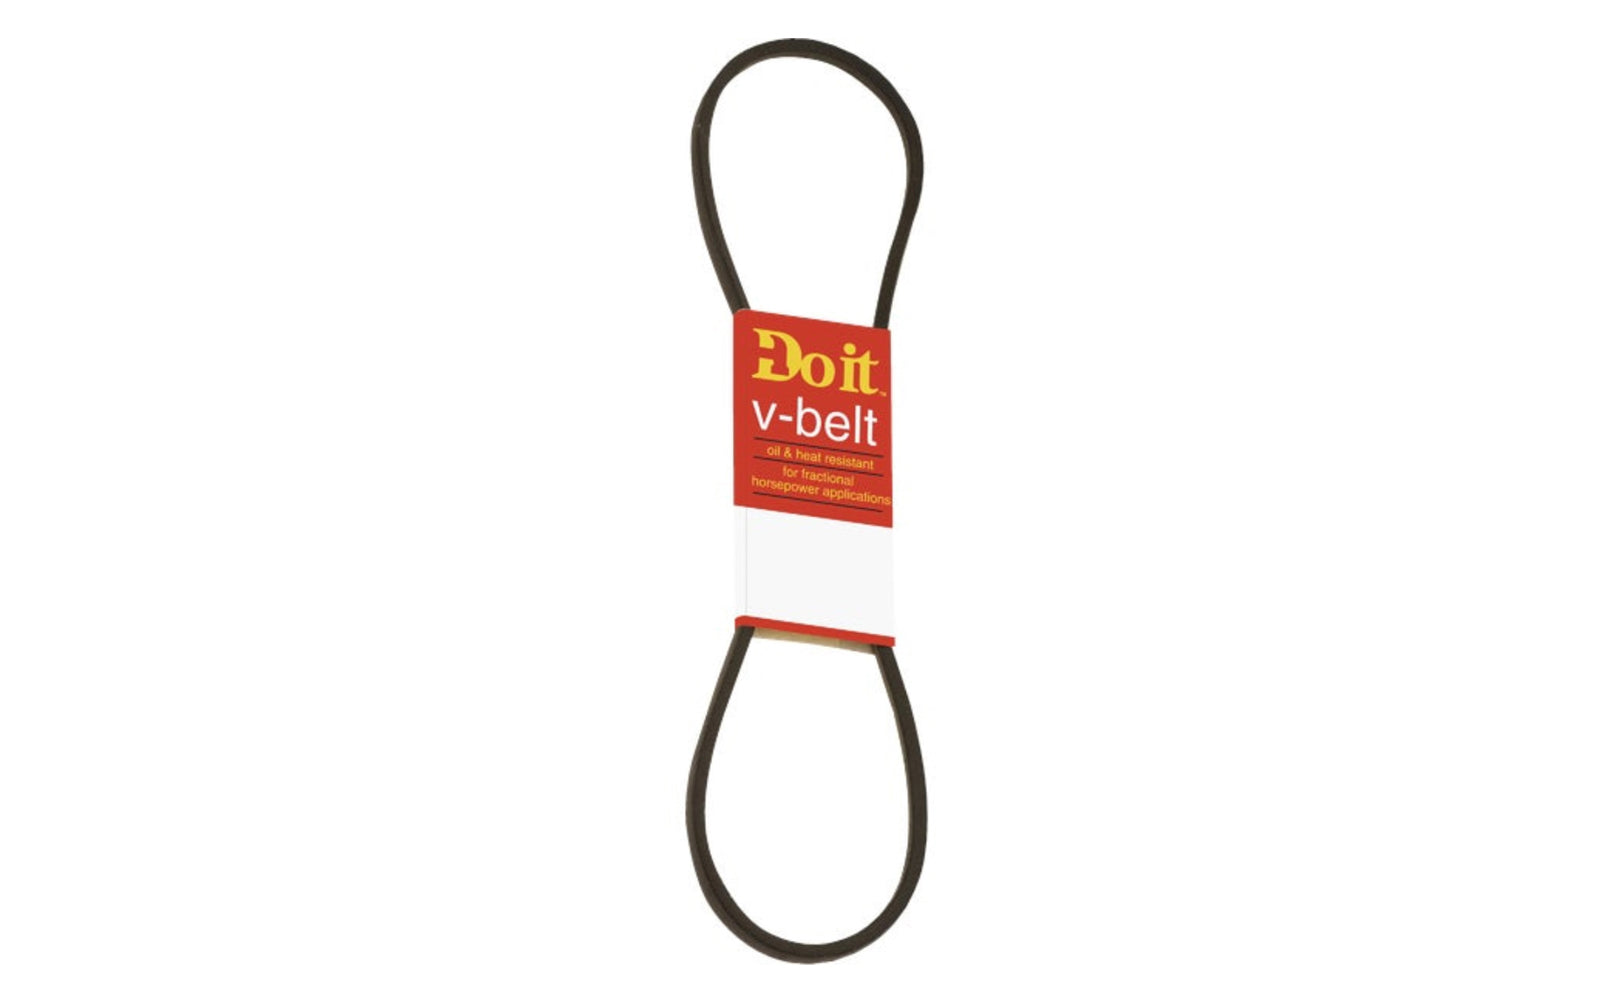 35" Long x 1/2" Width V-Belt - 4L350. Rubber V-Belt. Oil & heat resistant. Recommended for 1-3 HP (horsepower) light-duty applications. Typically the best option for electric powered applications. For refrigerators, washing machines, pumps, stokers, woodworking machines. Pulley type: A-Pulley.